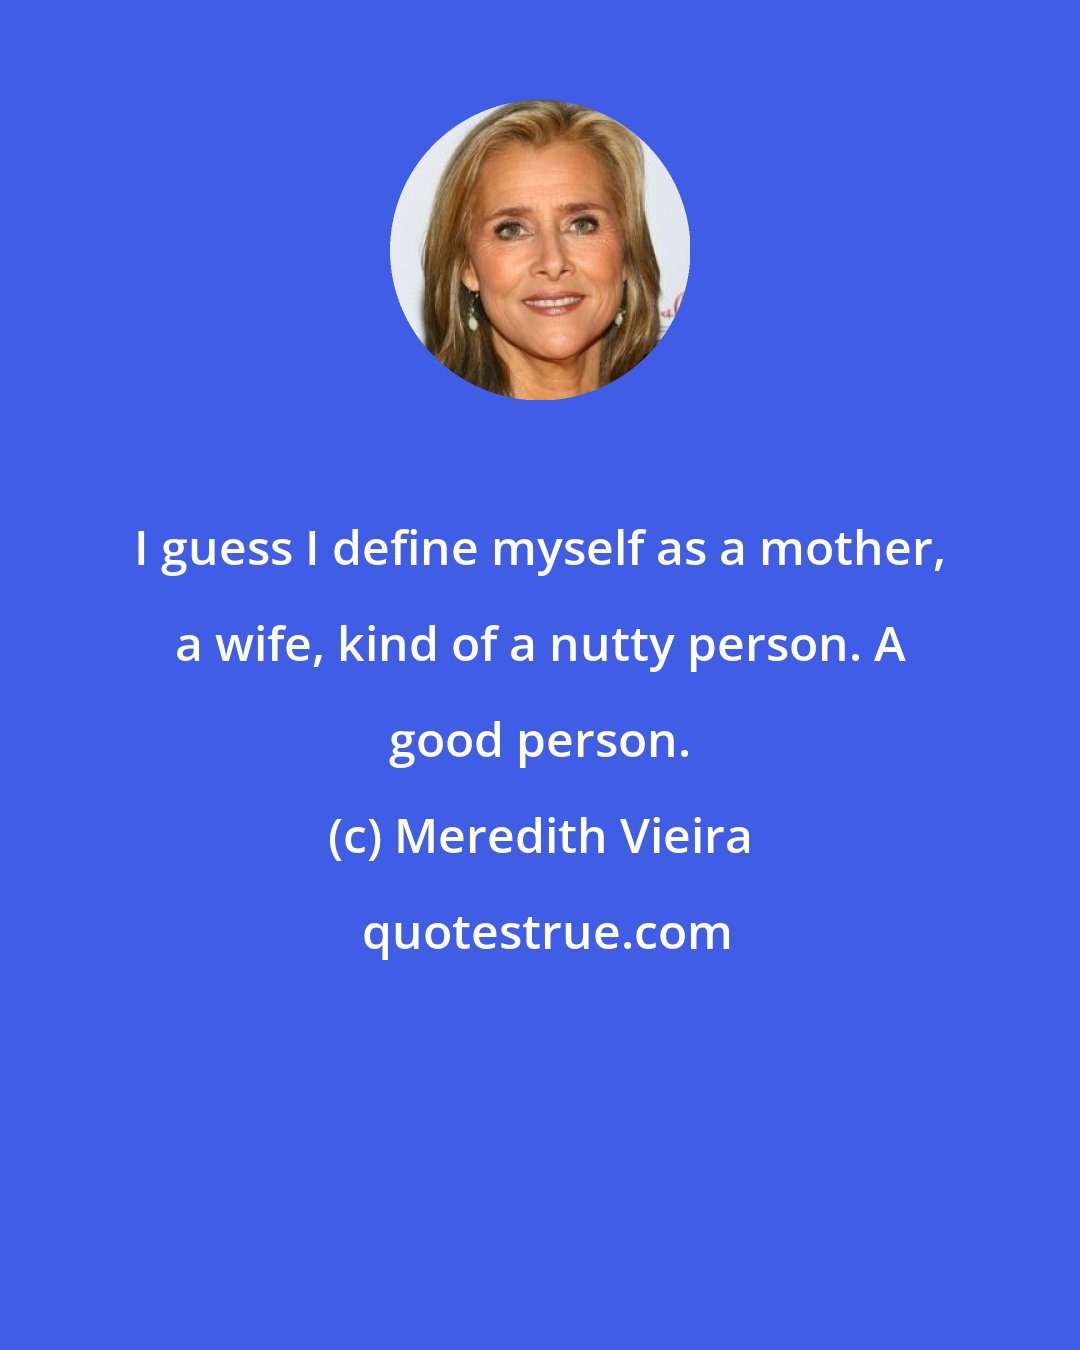 Meredith Vieira: I guess I define myself as a mother, a wife, kind of a nutty person. A good person.